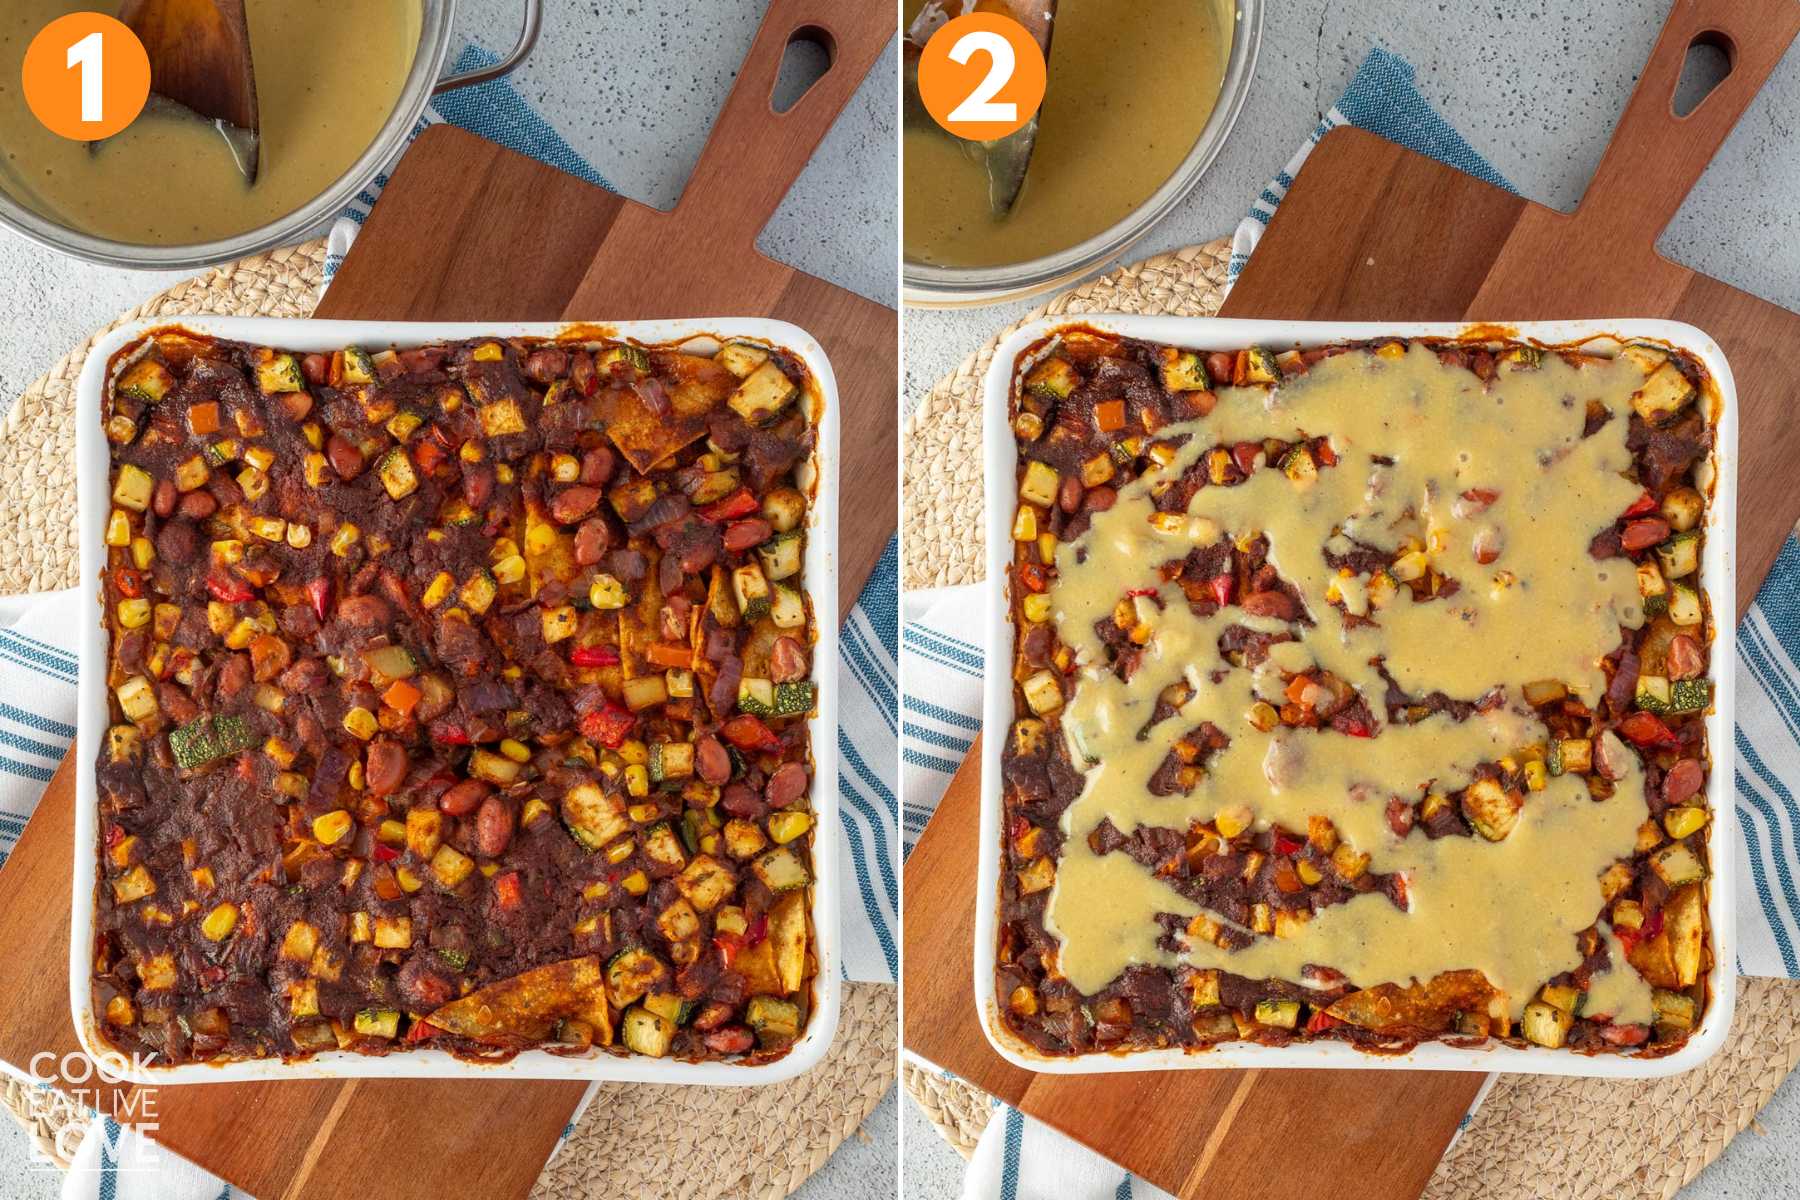 A collage showing the casserole after baking and then topped with the cheese sauce.